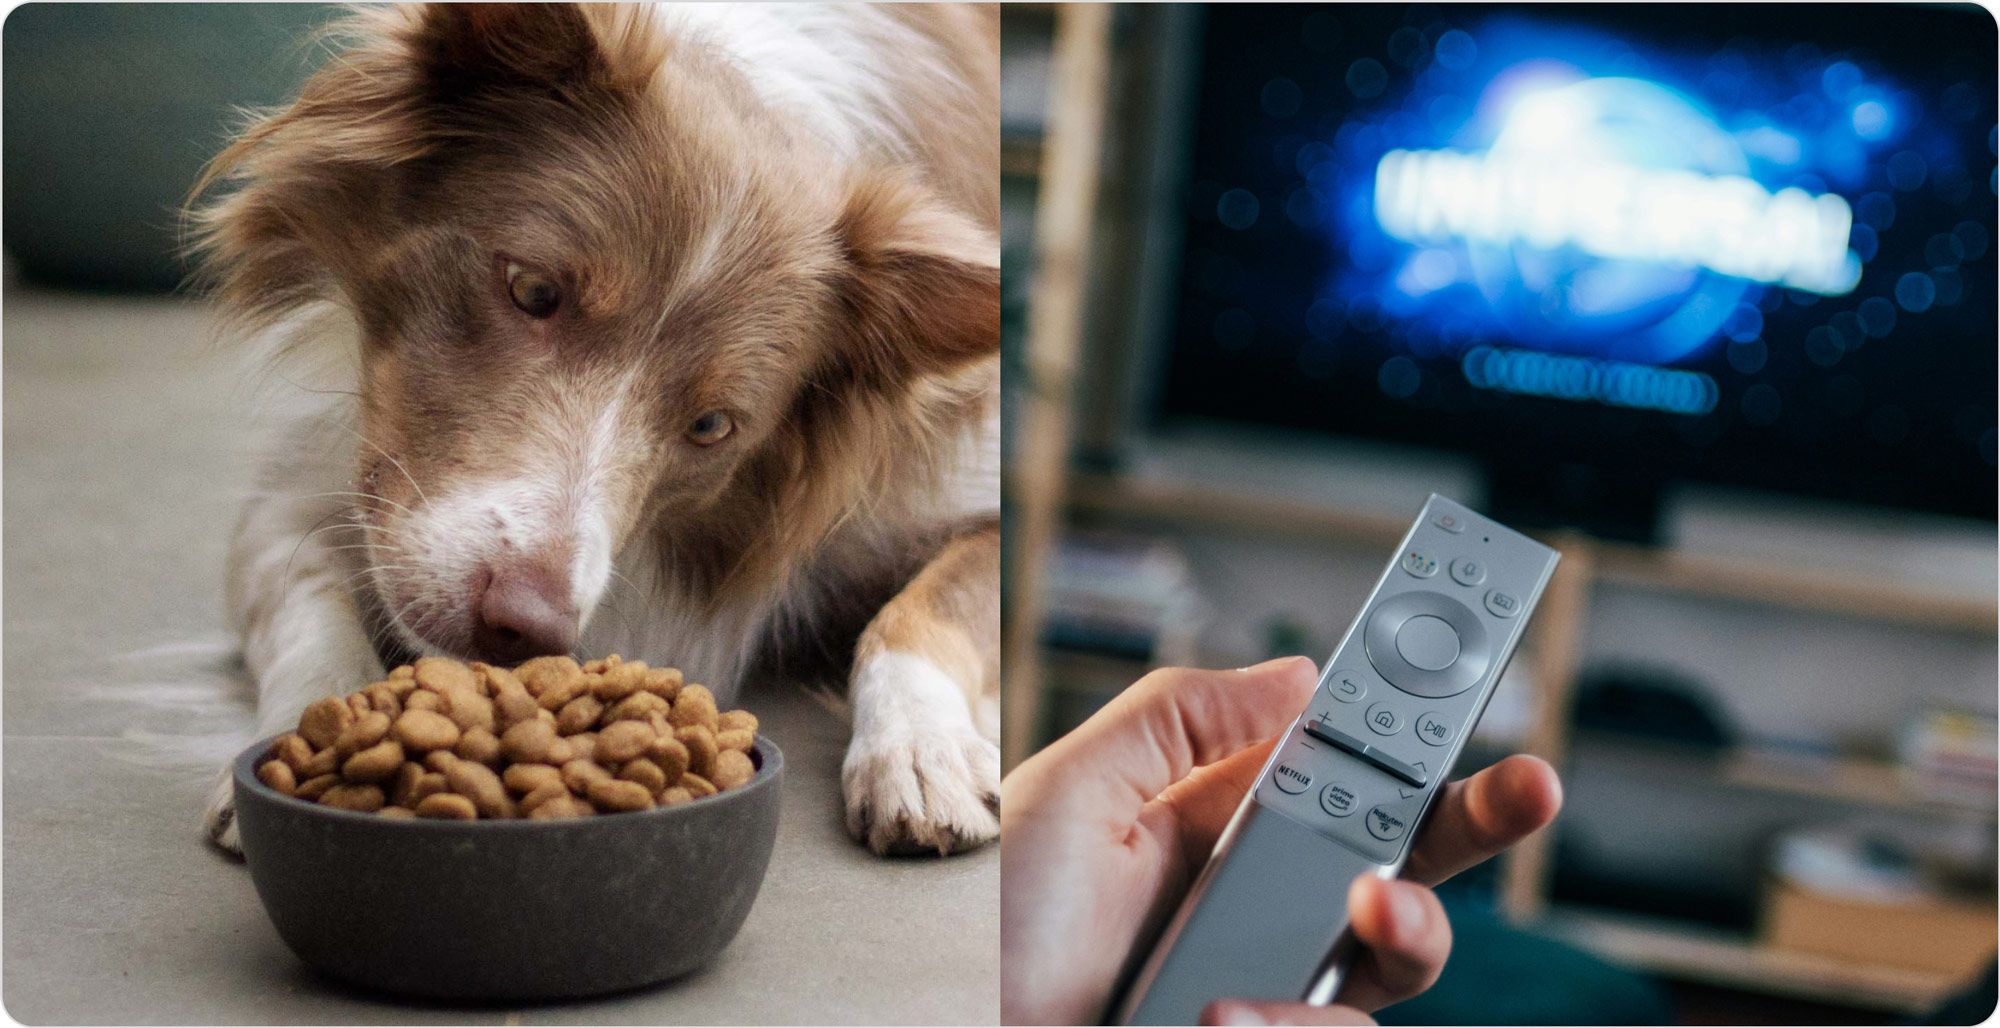 Two images to illustrate unrelated products/goods in cross price elasticity: one dog staring at food in a bowl, another of a remote pointed at a TV.